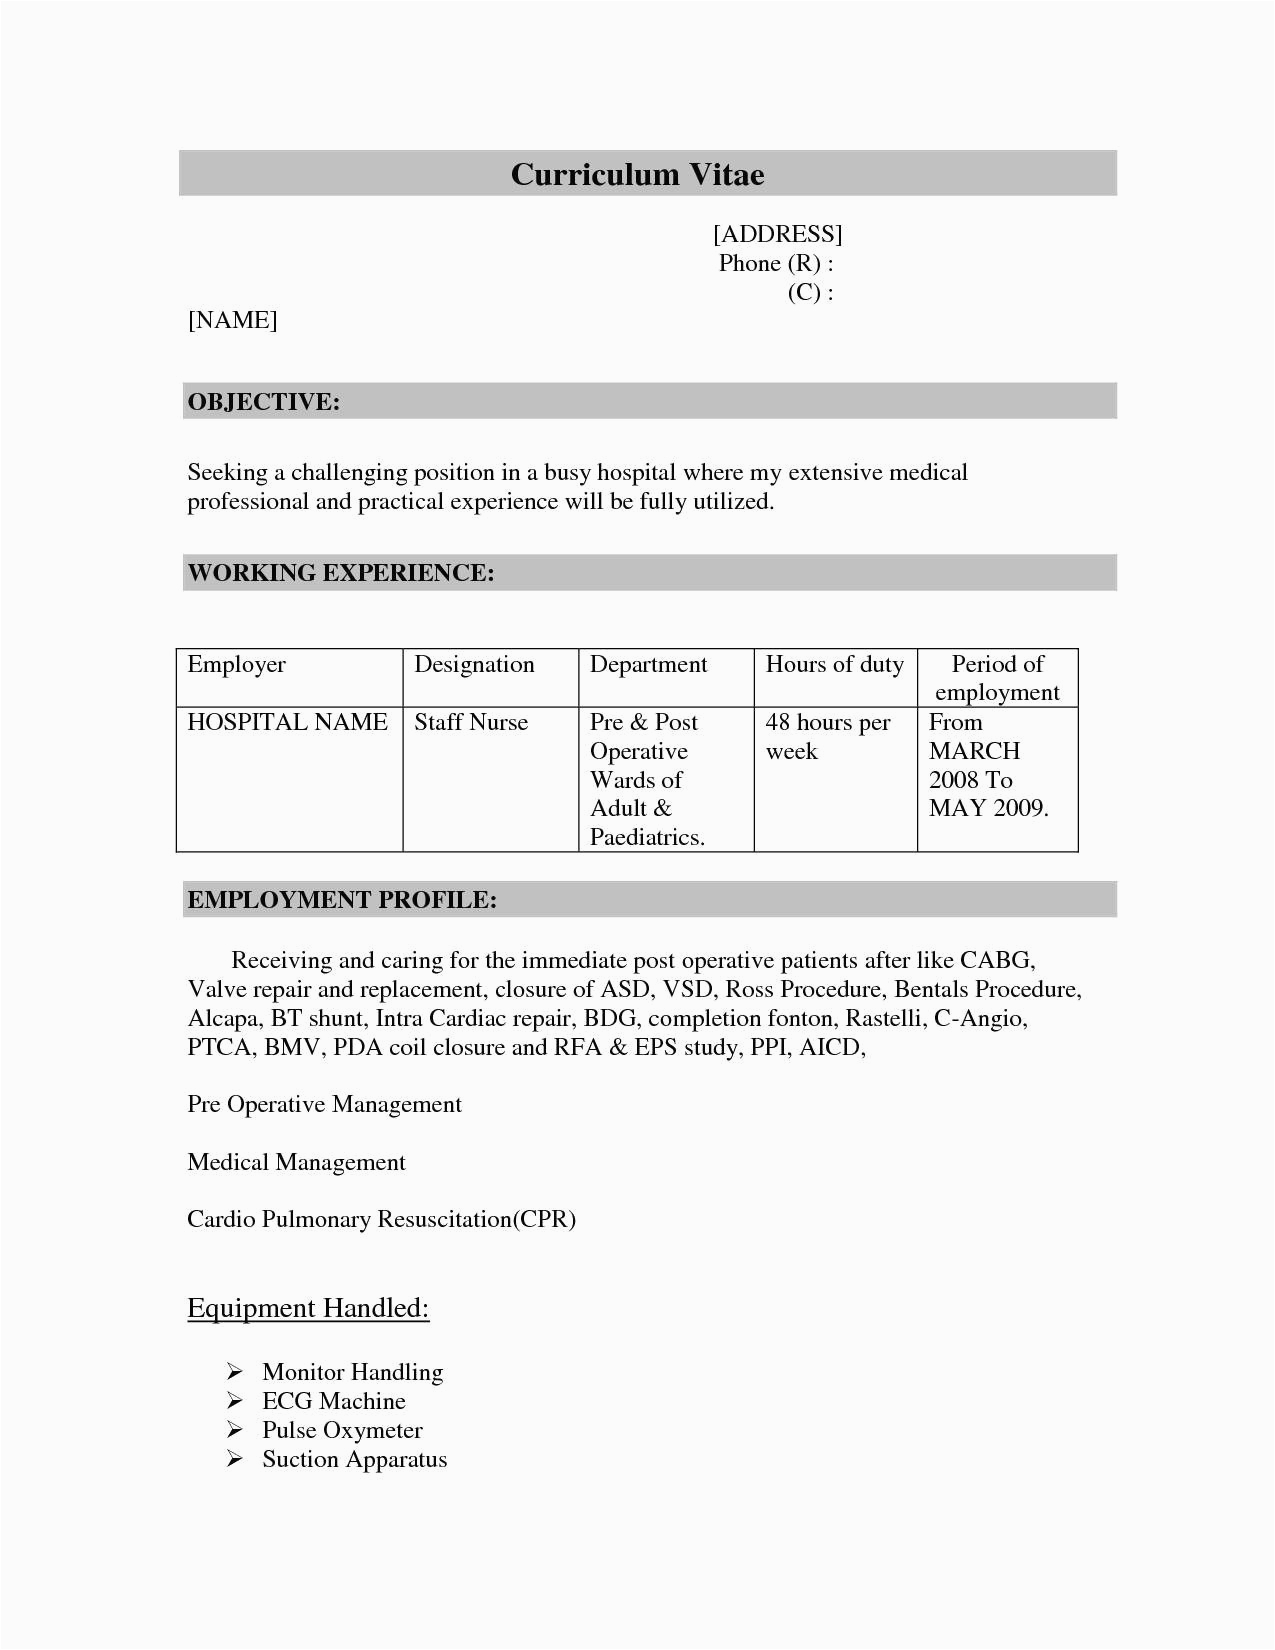 software testing resume samples for 1 year experience